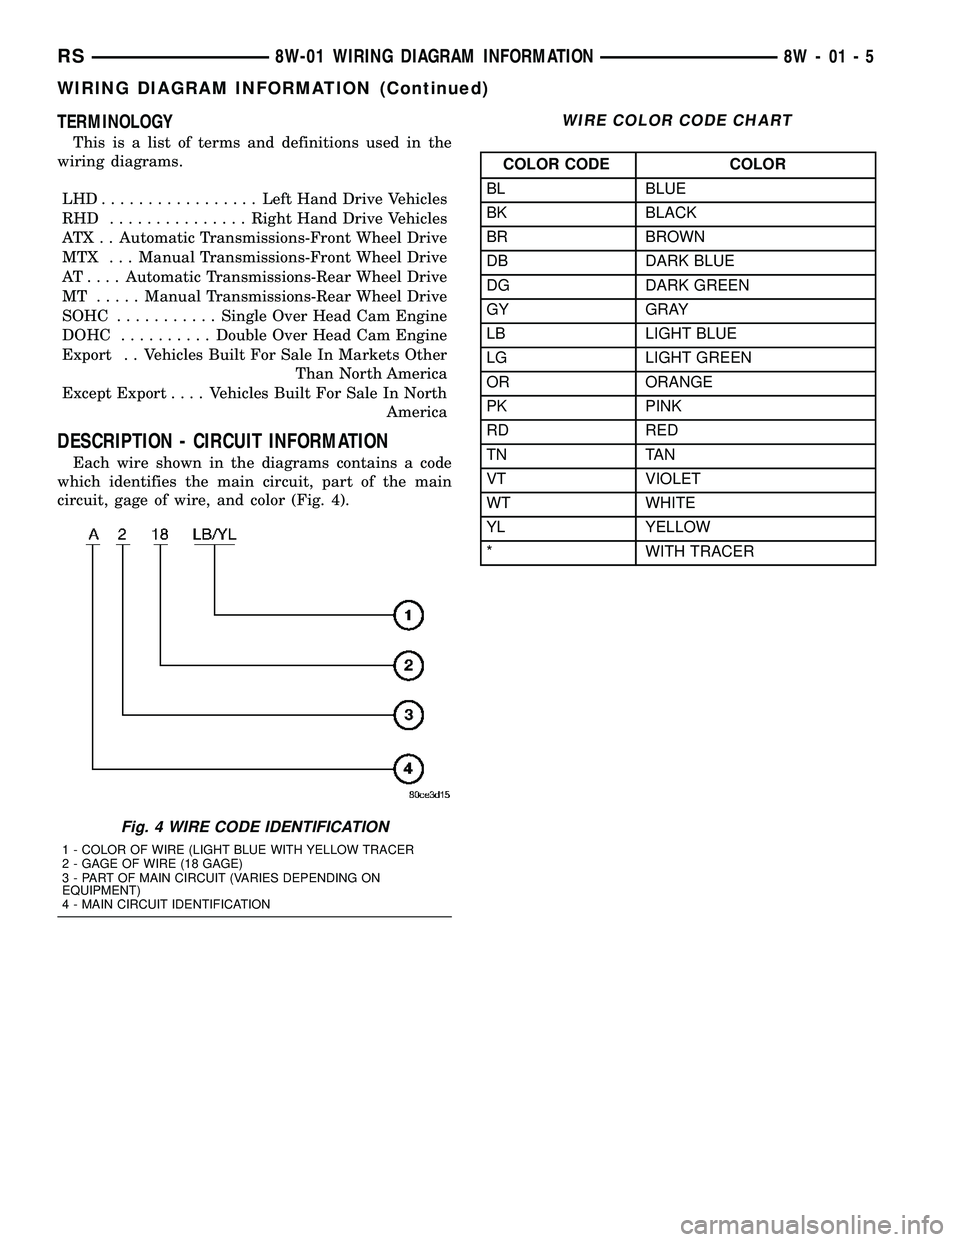 CHRYSLER VOYAGER 2005  Service Manual TERMINOLOGY
This is a list of terms and definitions used in the
wiring diagrams.
LHD.................Left Hand Drive Vehicles
RHD ...............Right Hand Drive Vehicles
ATX . . Automatic Transmissio